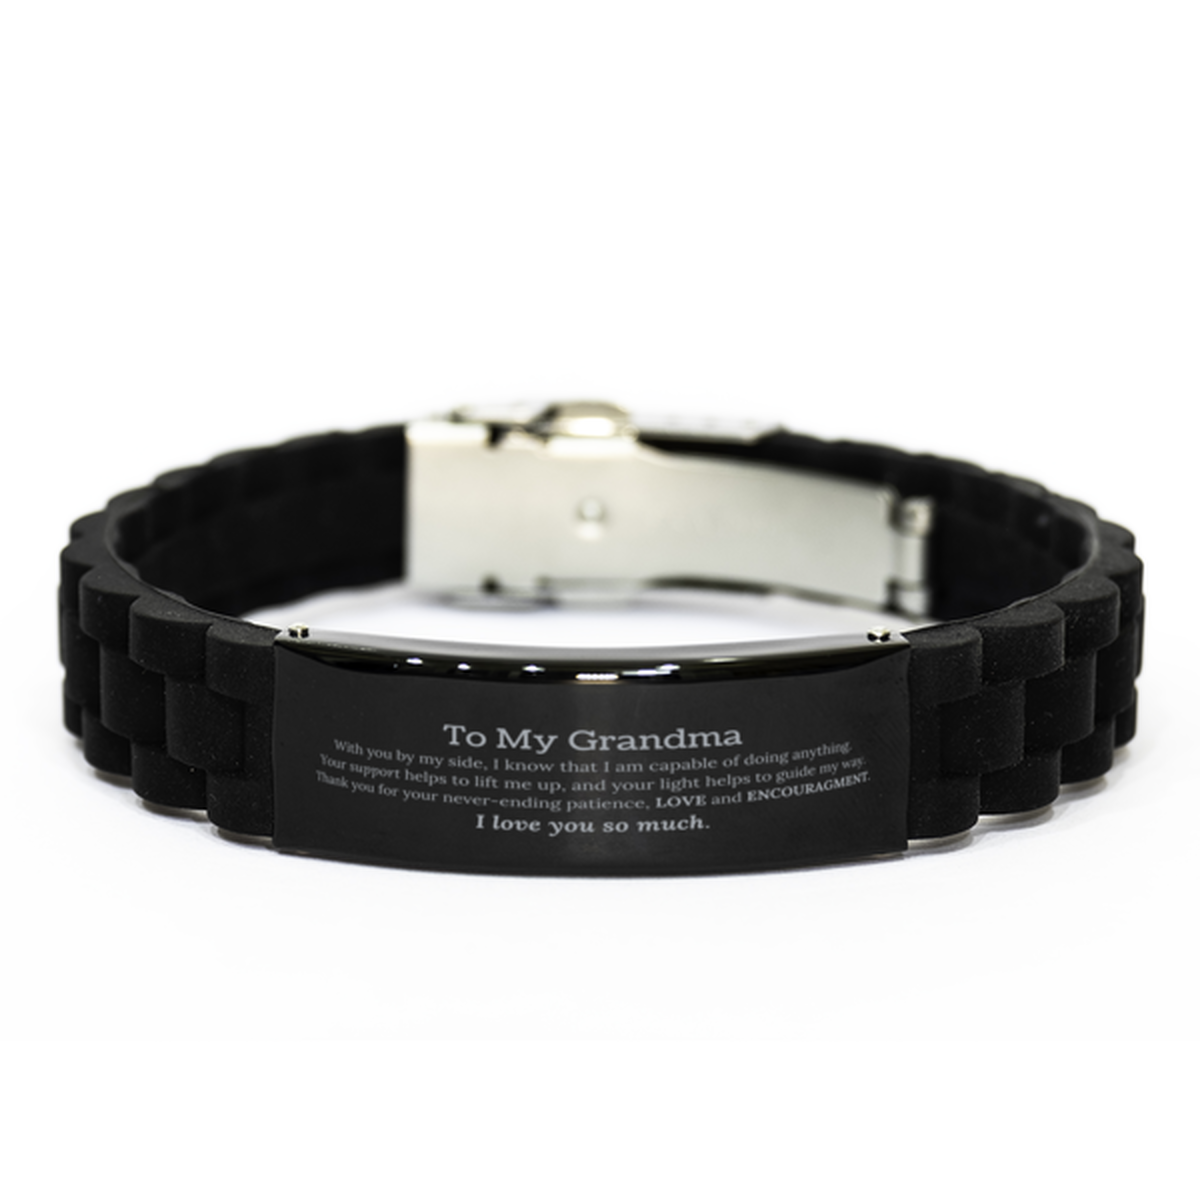 Appreciation Grandma Black Glidelock Clasp Bracelet Gifts, To My Grandma Birthday Christmas Wedding Keepsake Gifts for Grandma With you by my side, I know that I am capable of doing anything. I love you so much